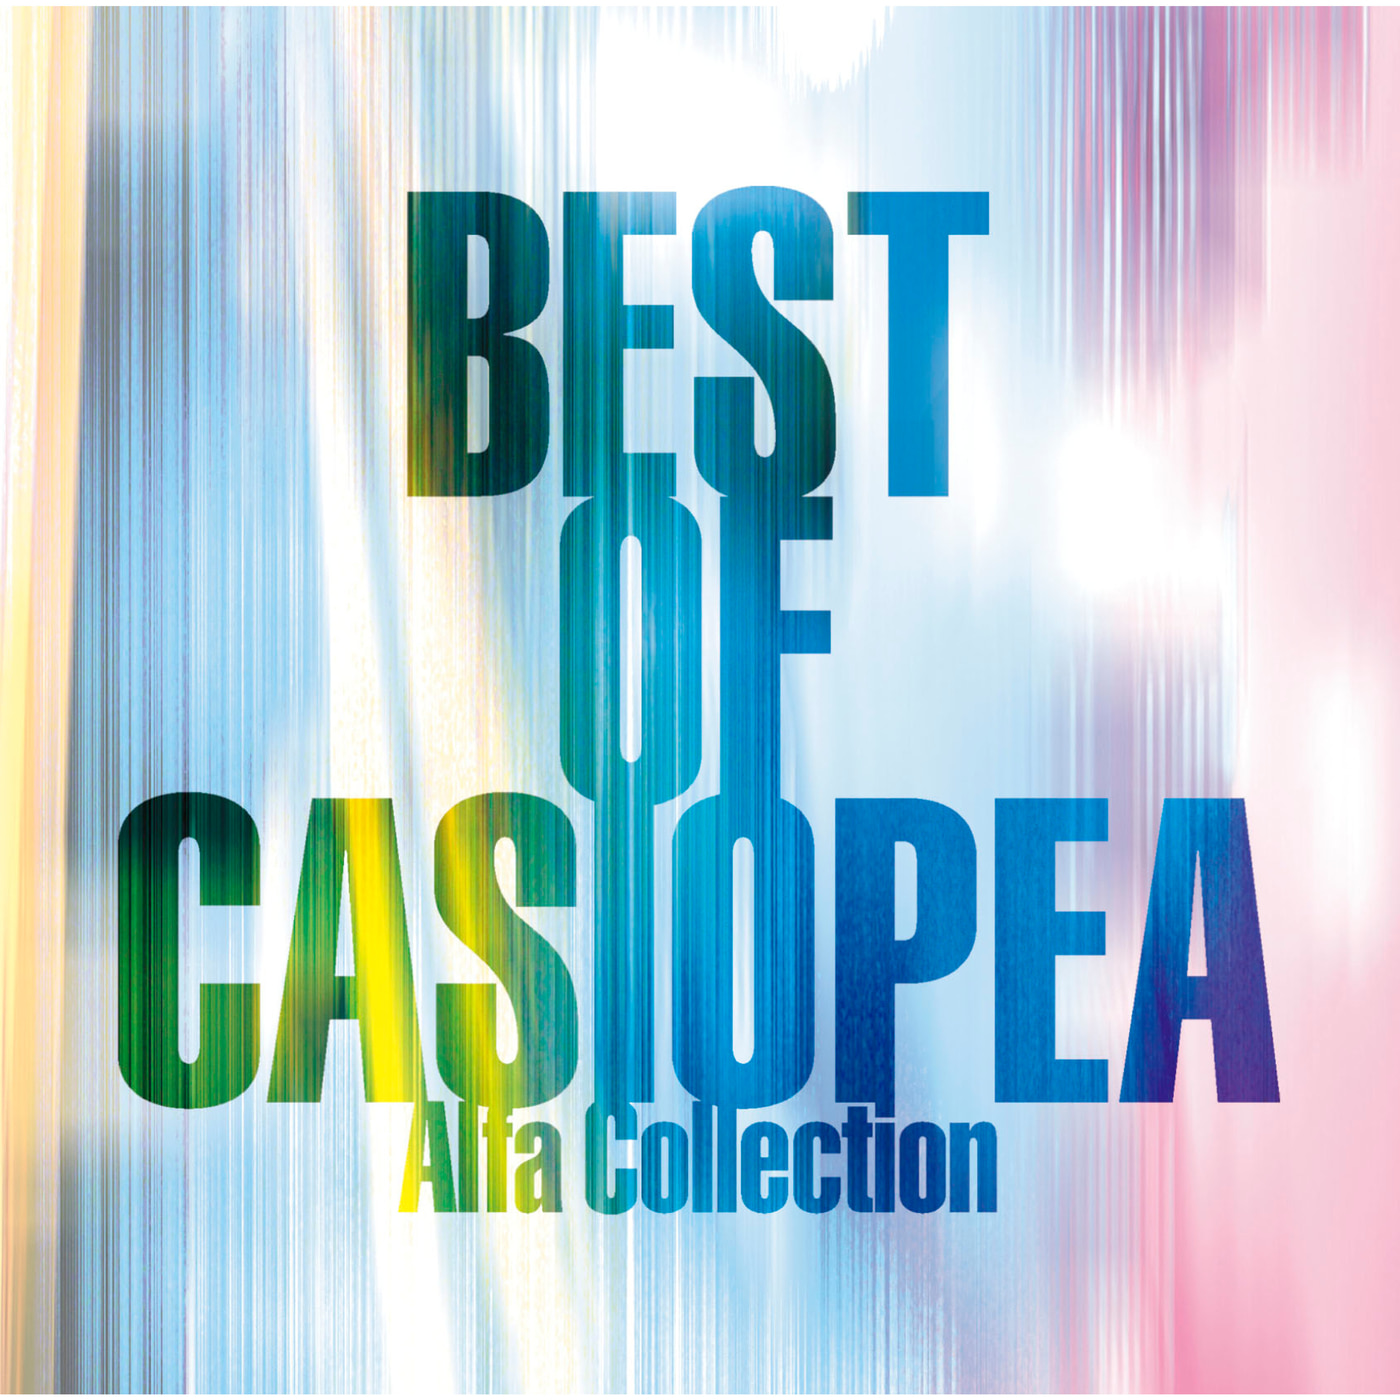 Casiopea-Looking Up